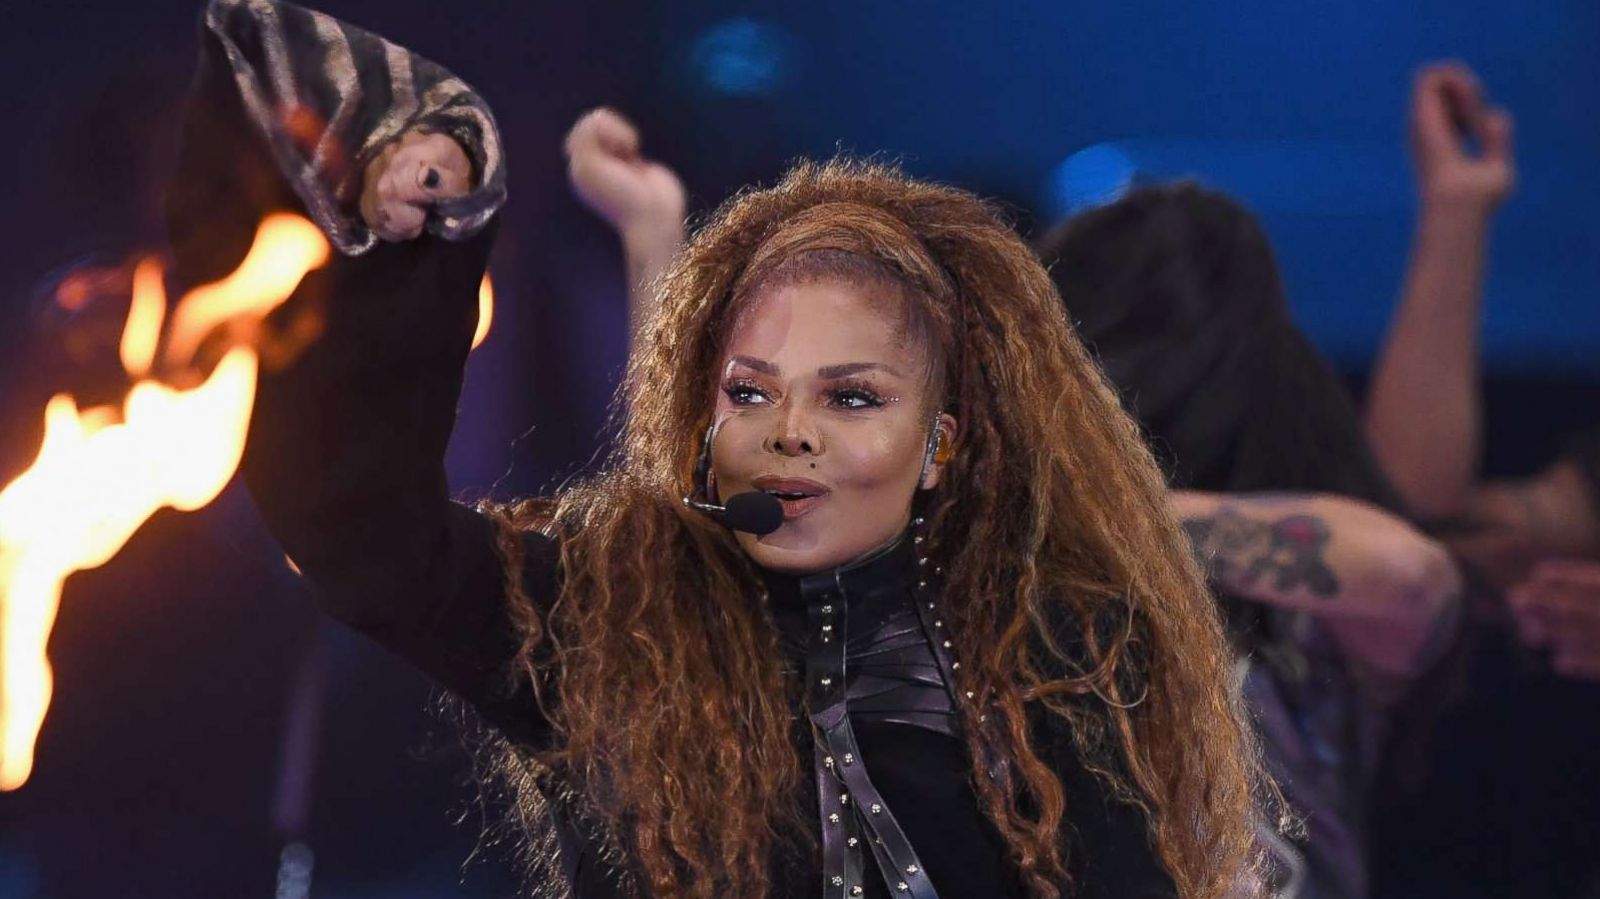 PHOTO: Janet Jackson performs on stage during the MTV EMAs 2018 at Bilbao Exhibition Centre on Nov. 4, 2018 in Bilbao, Spain.